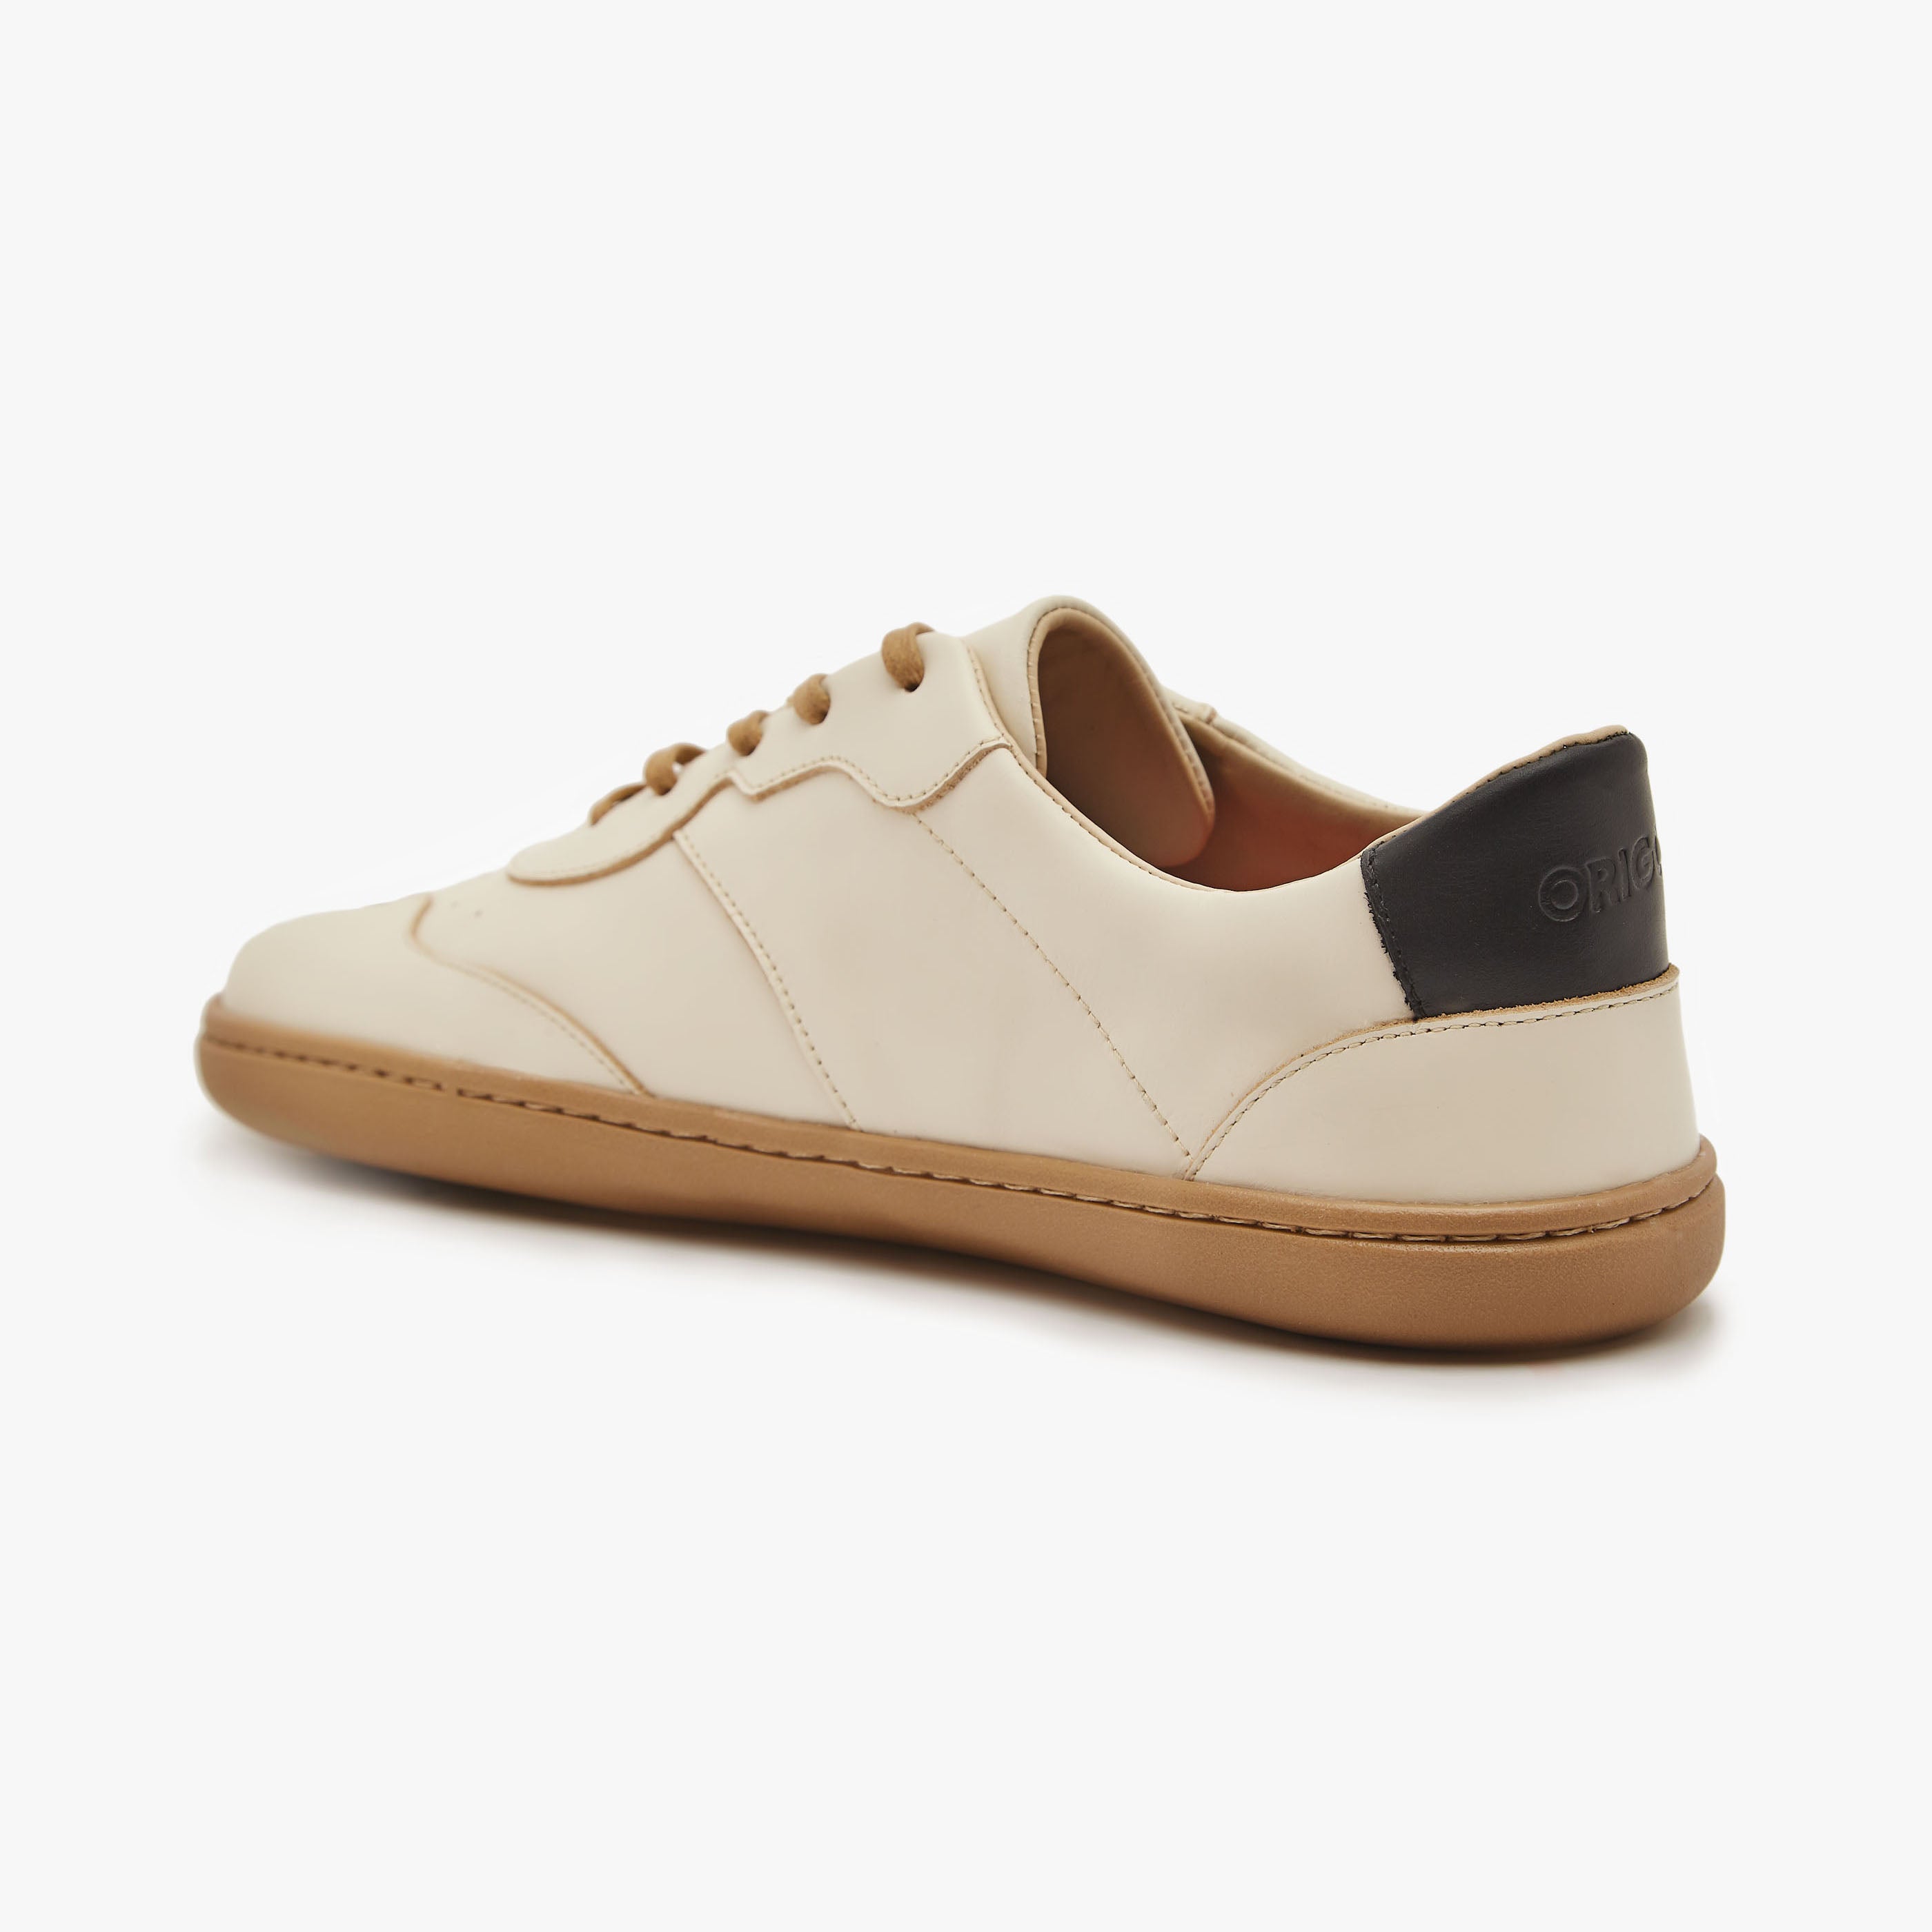 Barefoot Shoes - Men - Natural Leather - Sand - The Retro Sneakers ...